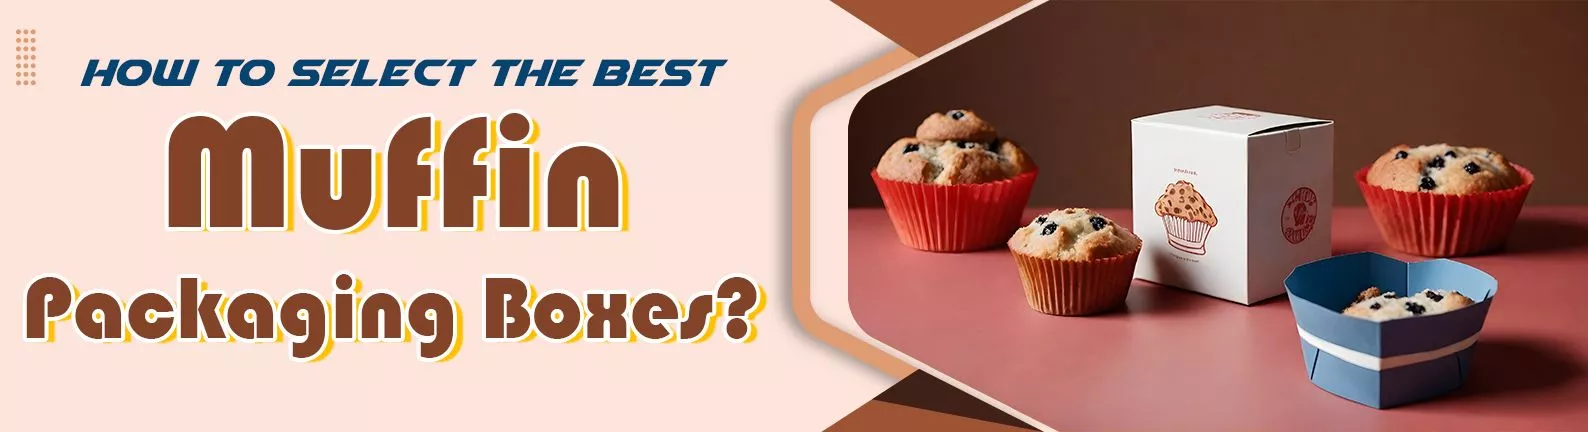 How To Select the Best Muffin Packaging Boxes?